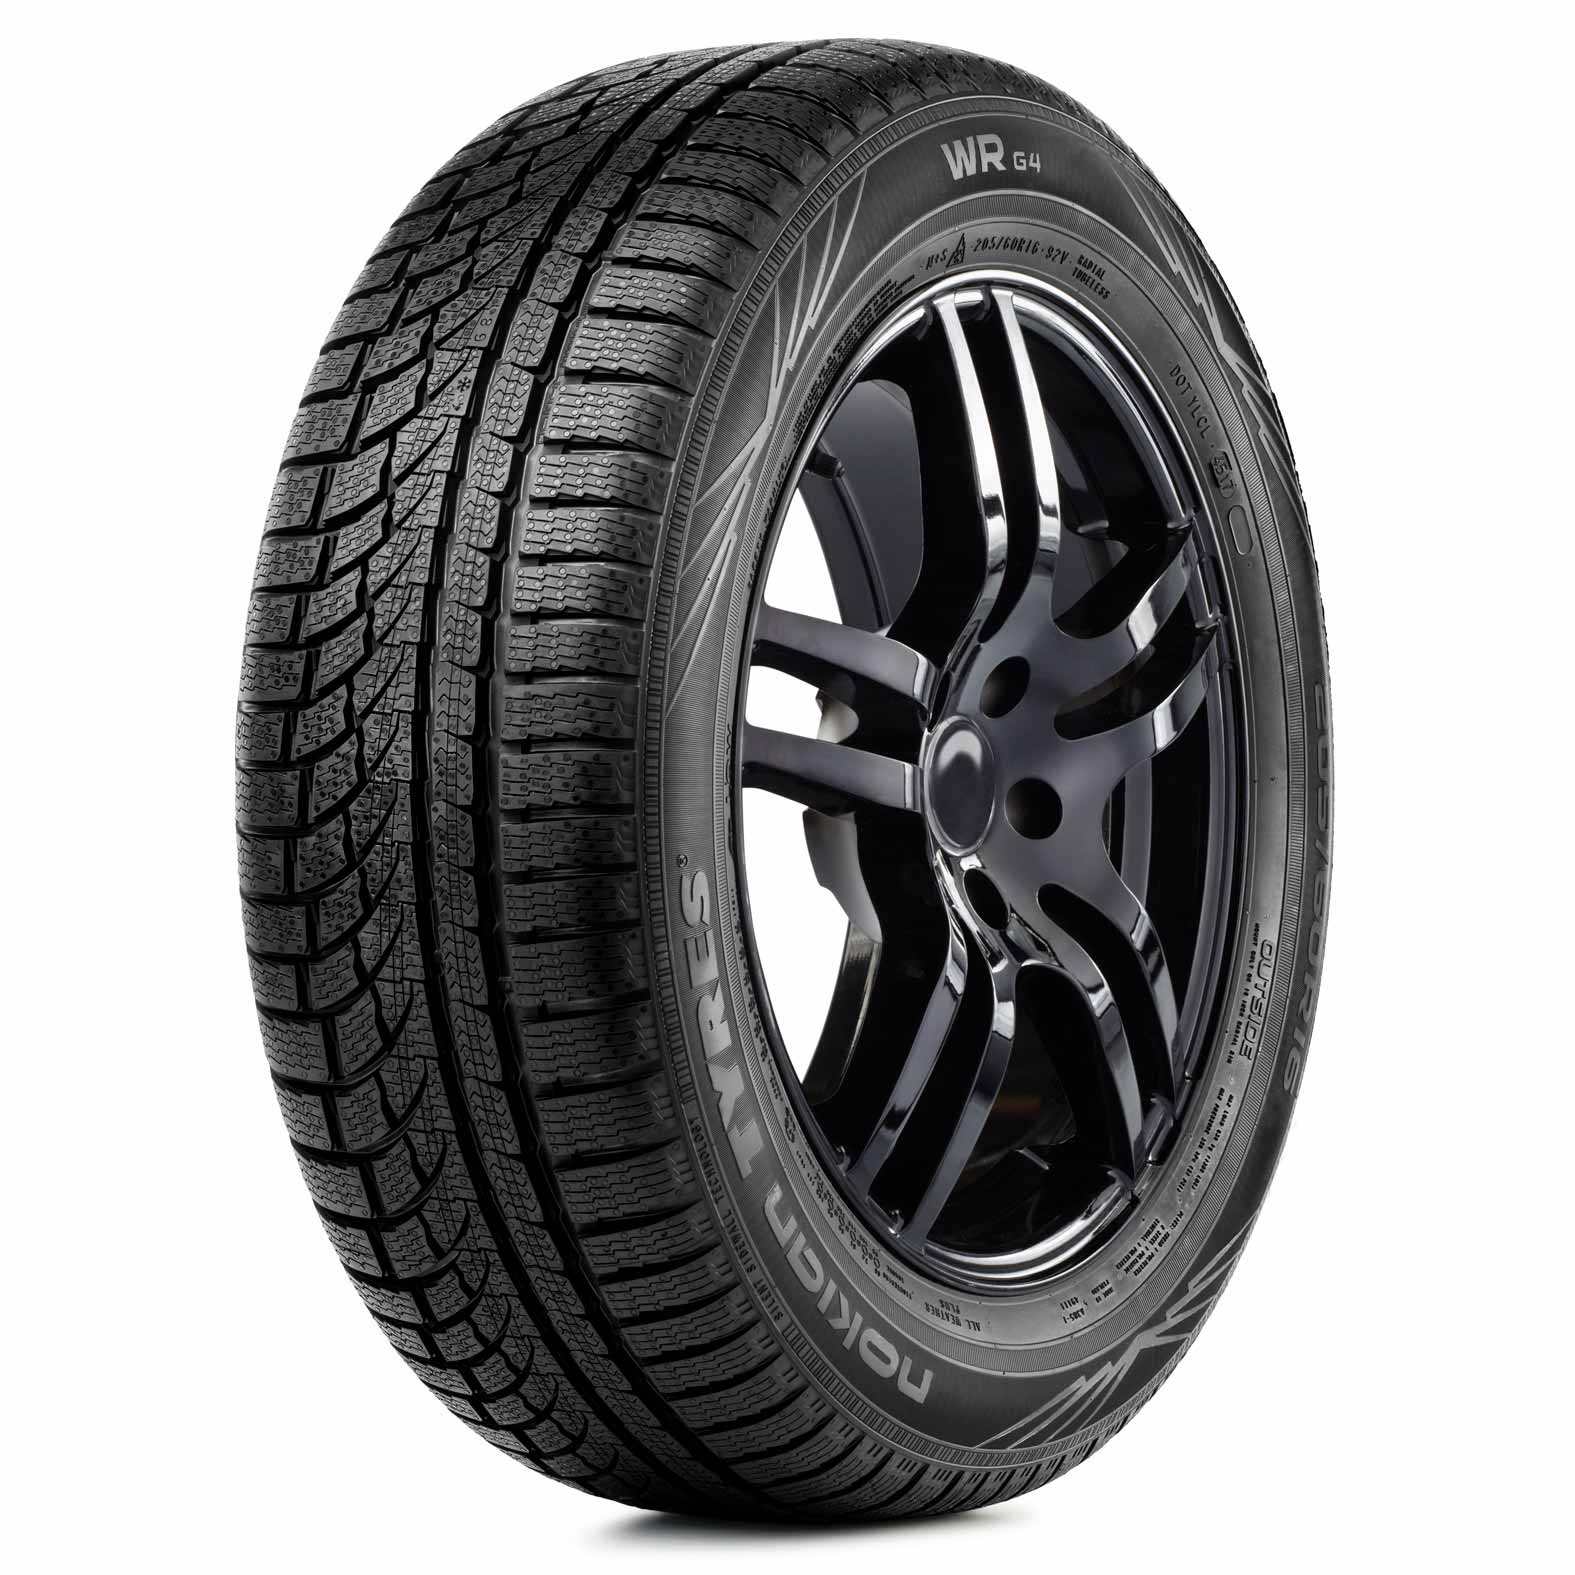 WRG4 Kal | for Tires All-Weather Tire Nokian